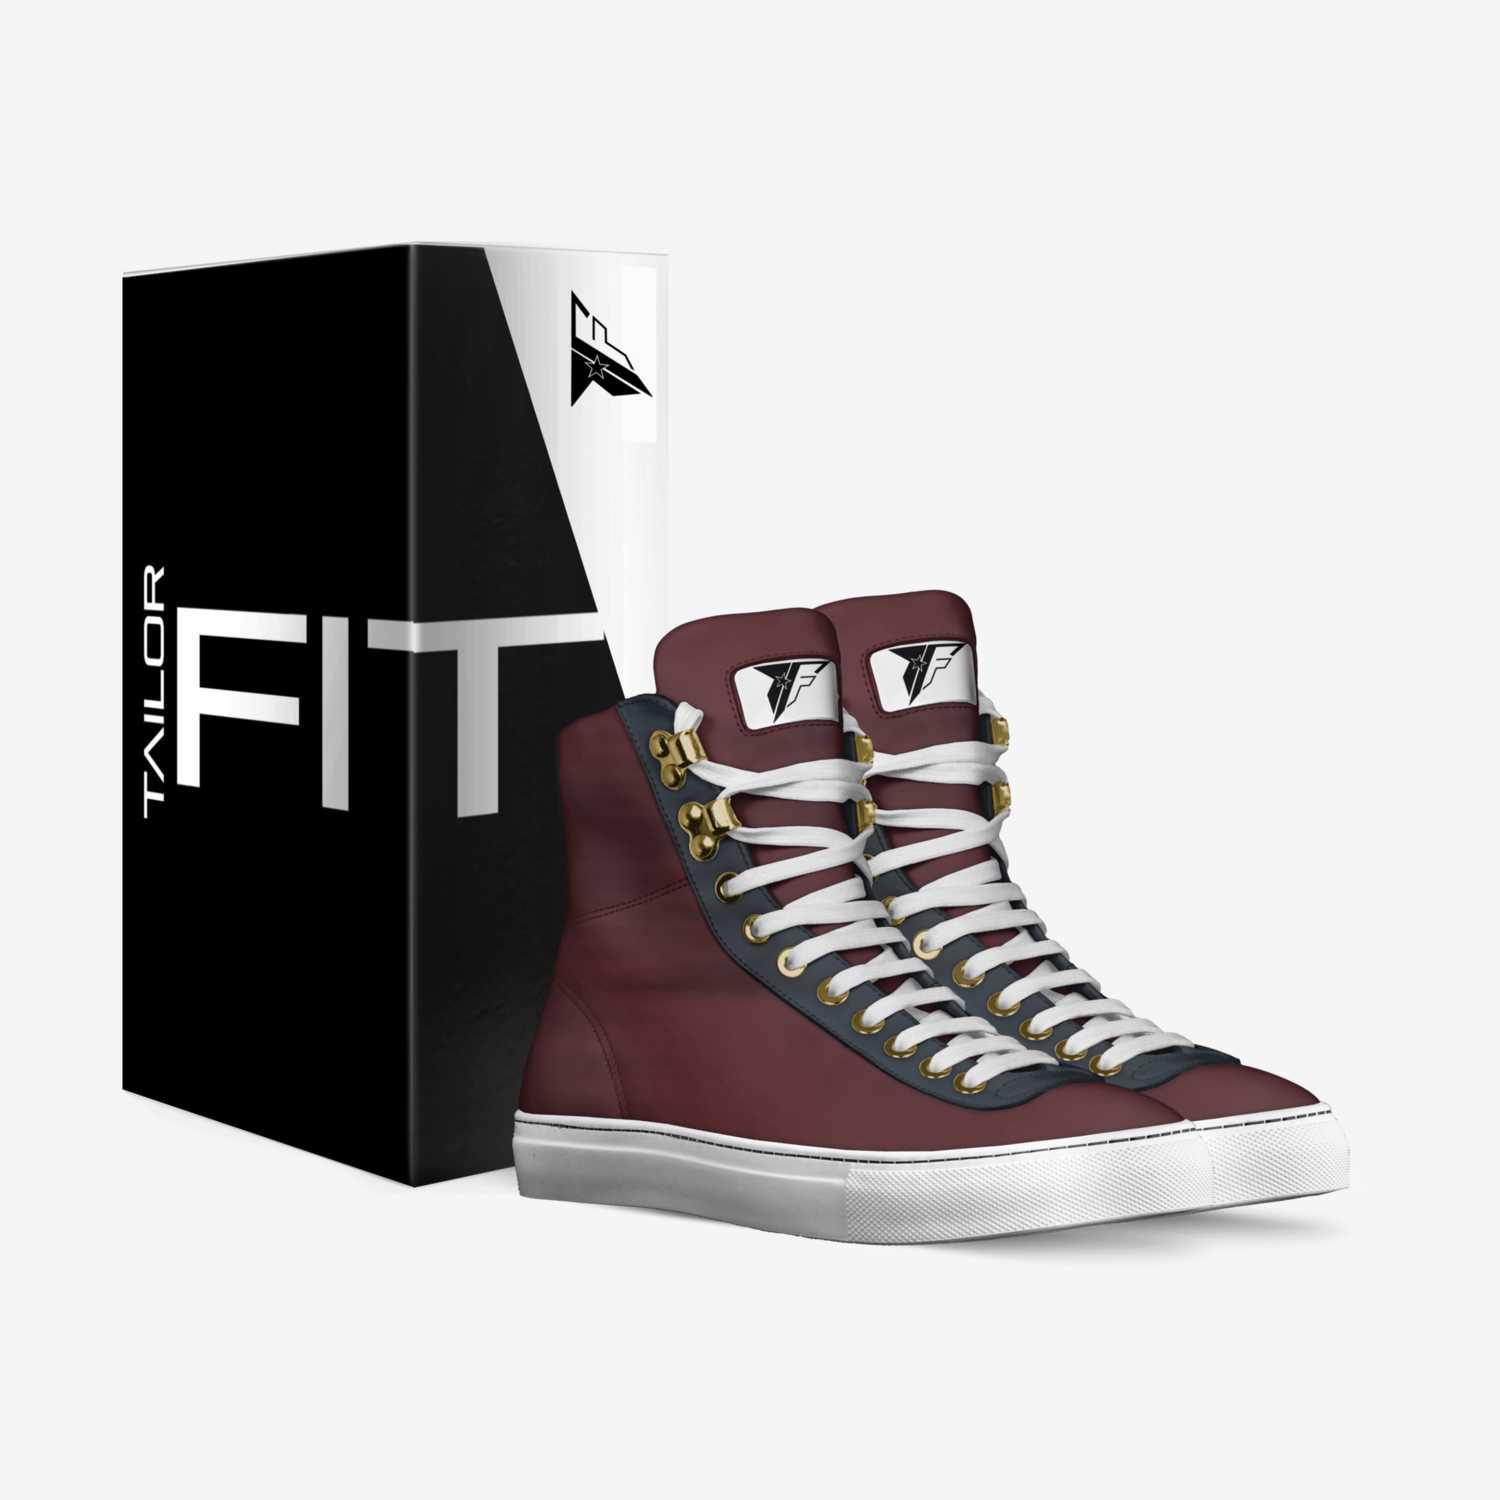 TAILOR FIT custom made in Italy shoes by Talor Fiit | Box view